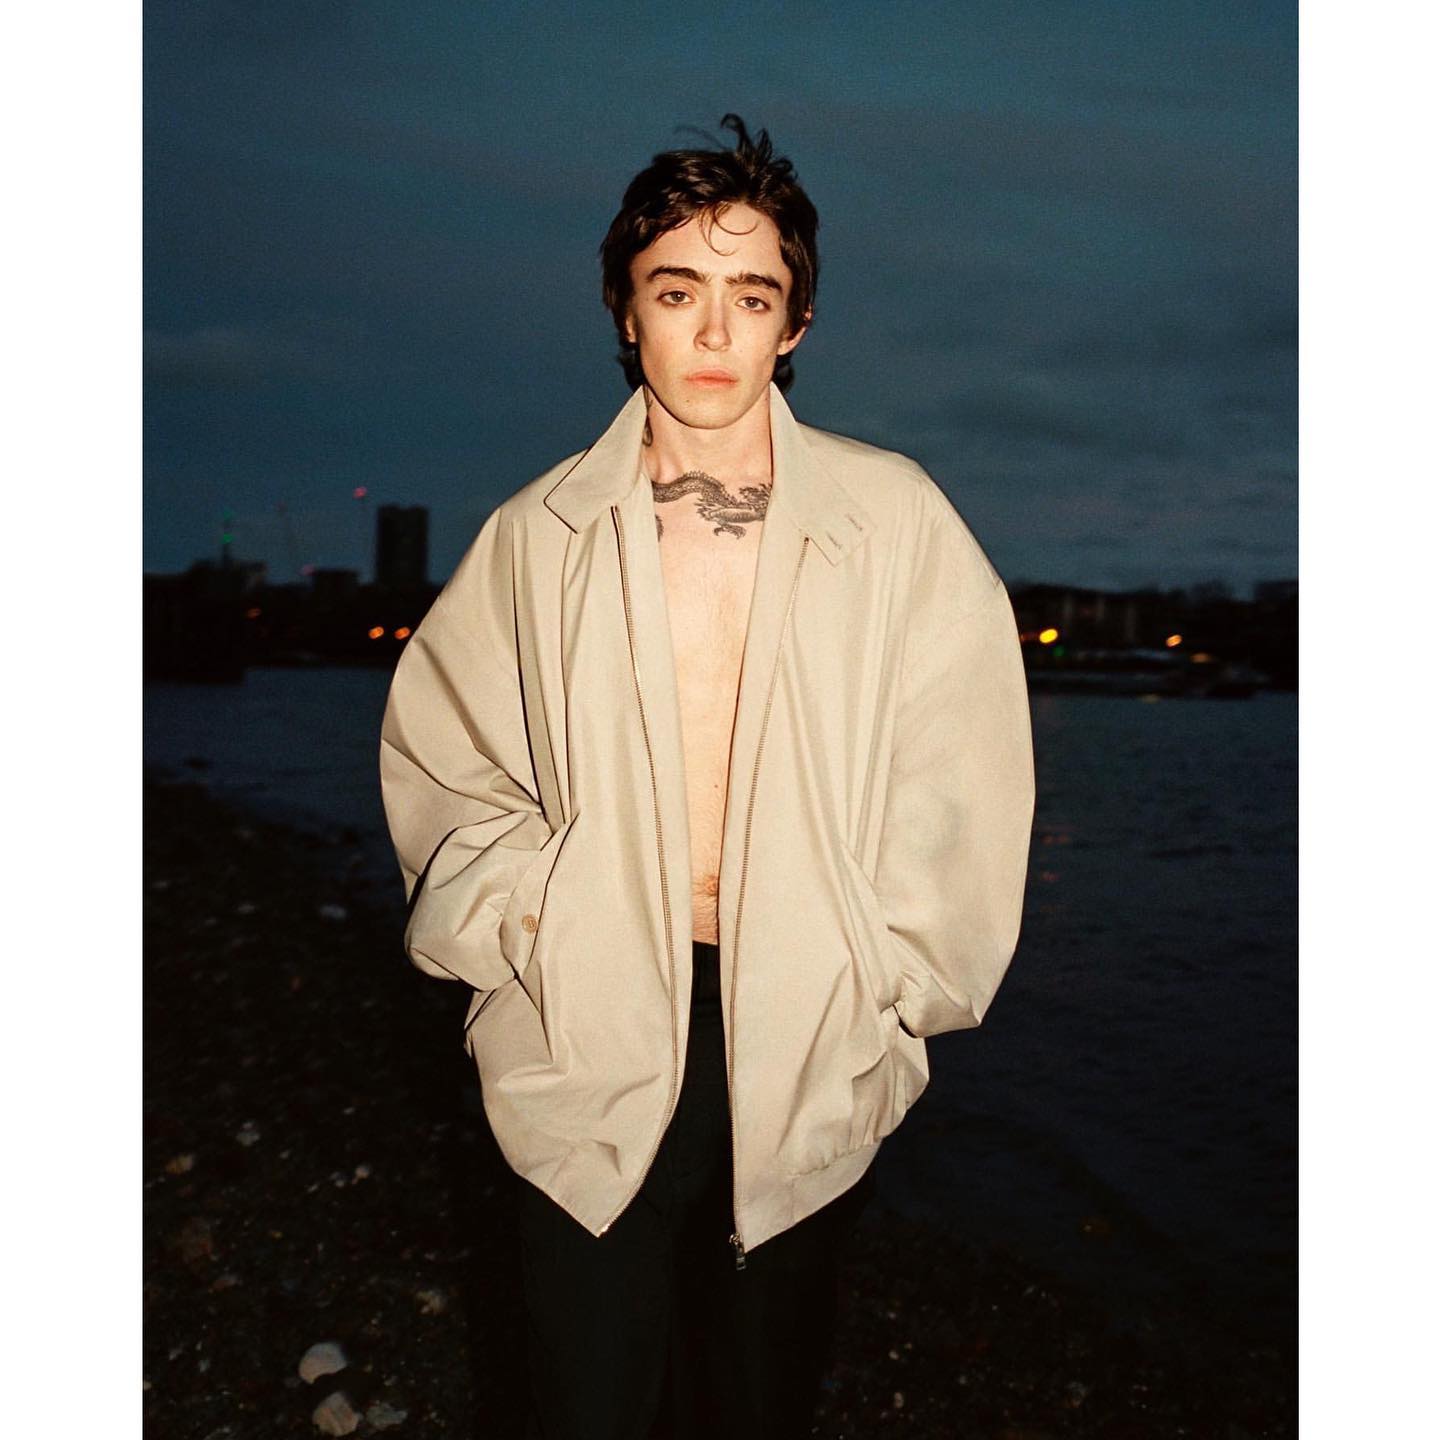 Emil (@3mil01 ) for Document Journal. Photography by Ben Toms, styling by Robbie Spencer, casting by Gabrielle Lawrence.